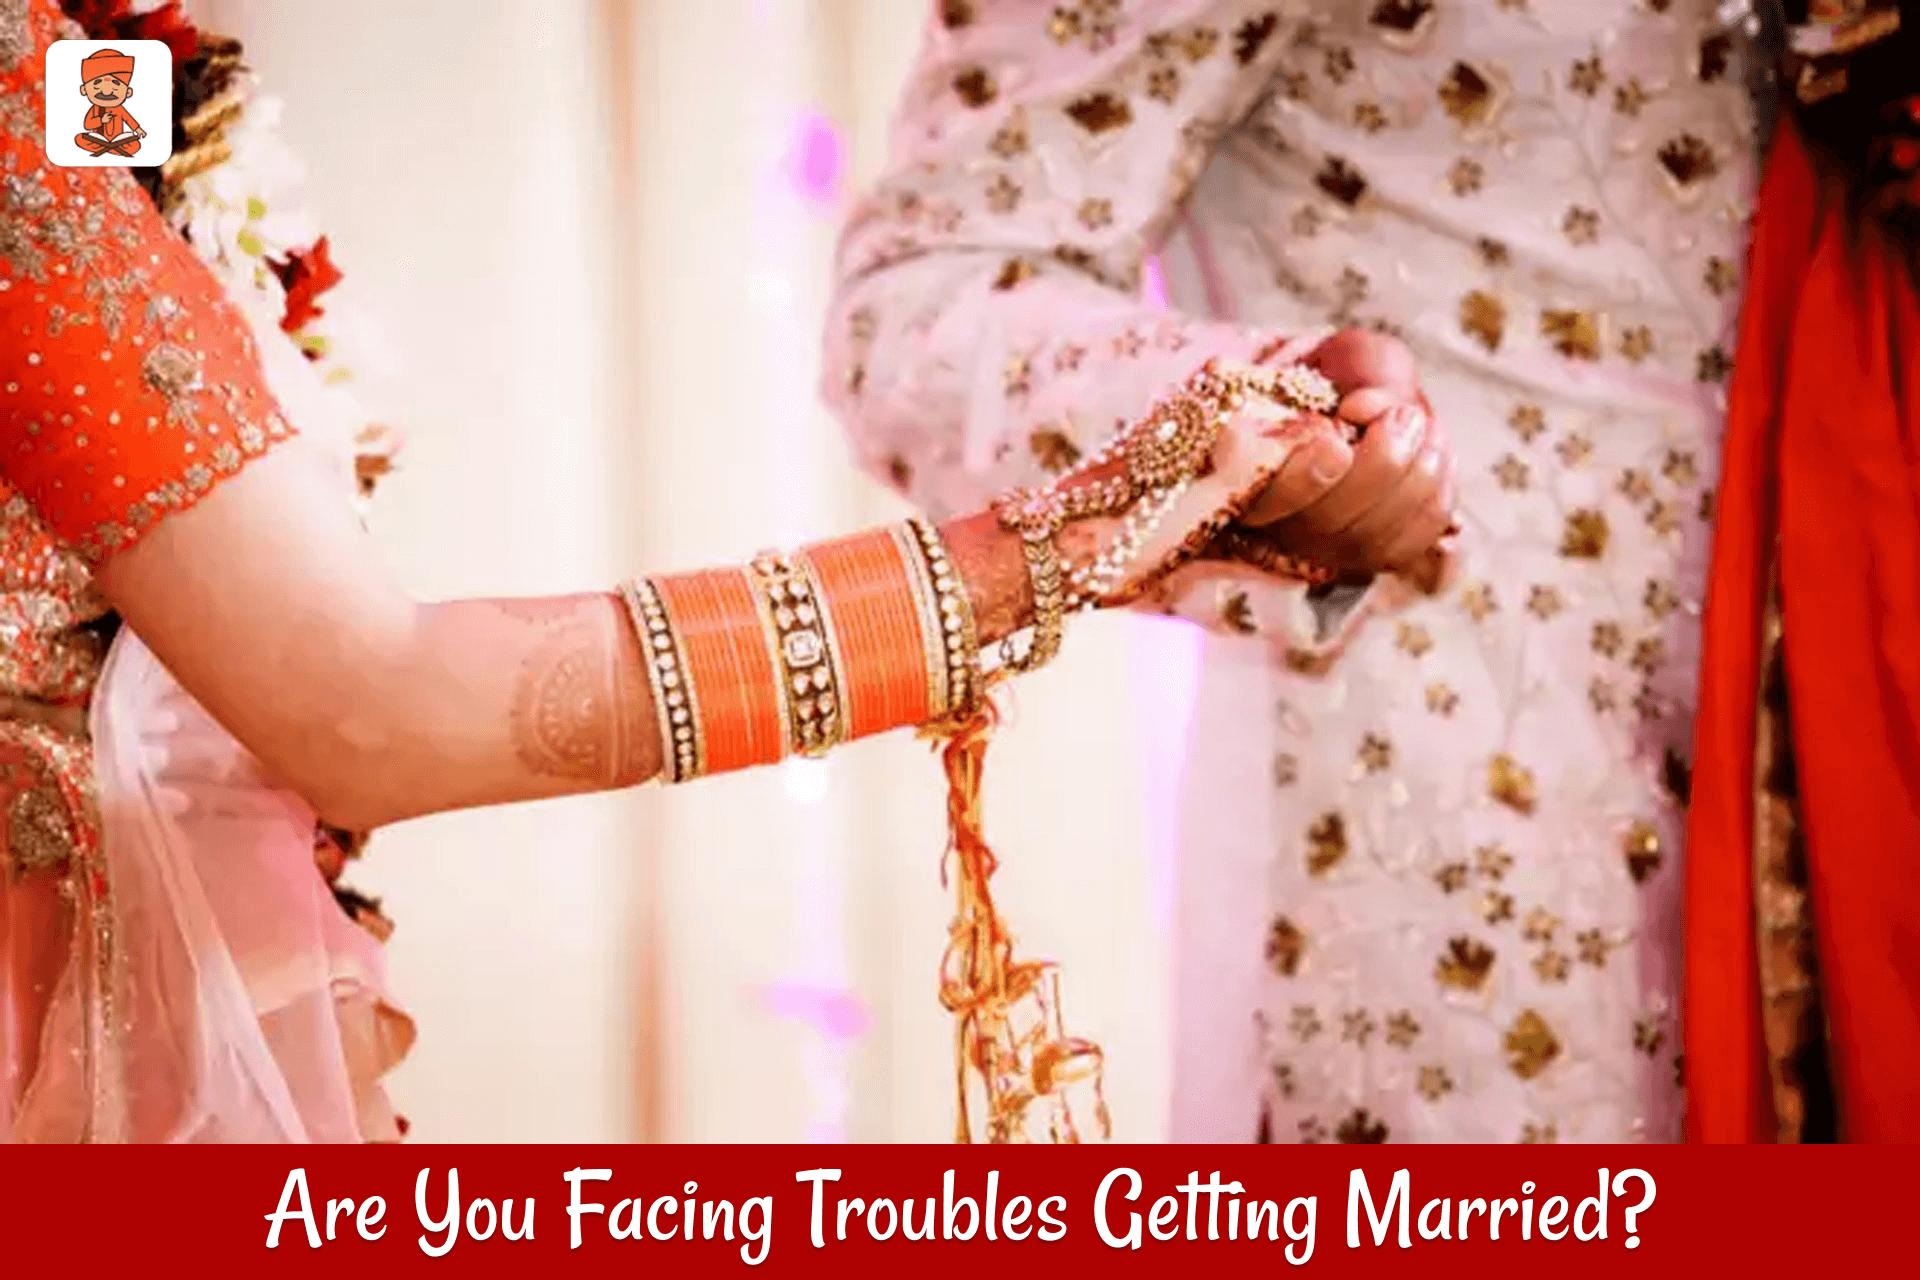 Are You Facing Troubles Getting Married? Follow Love Marriage Astrology Online!